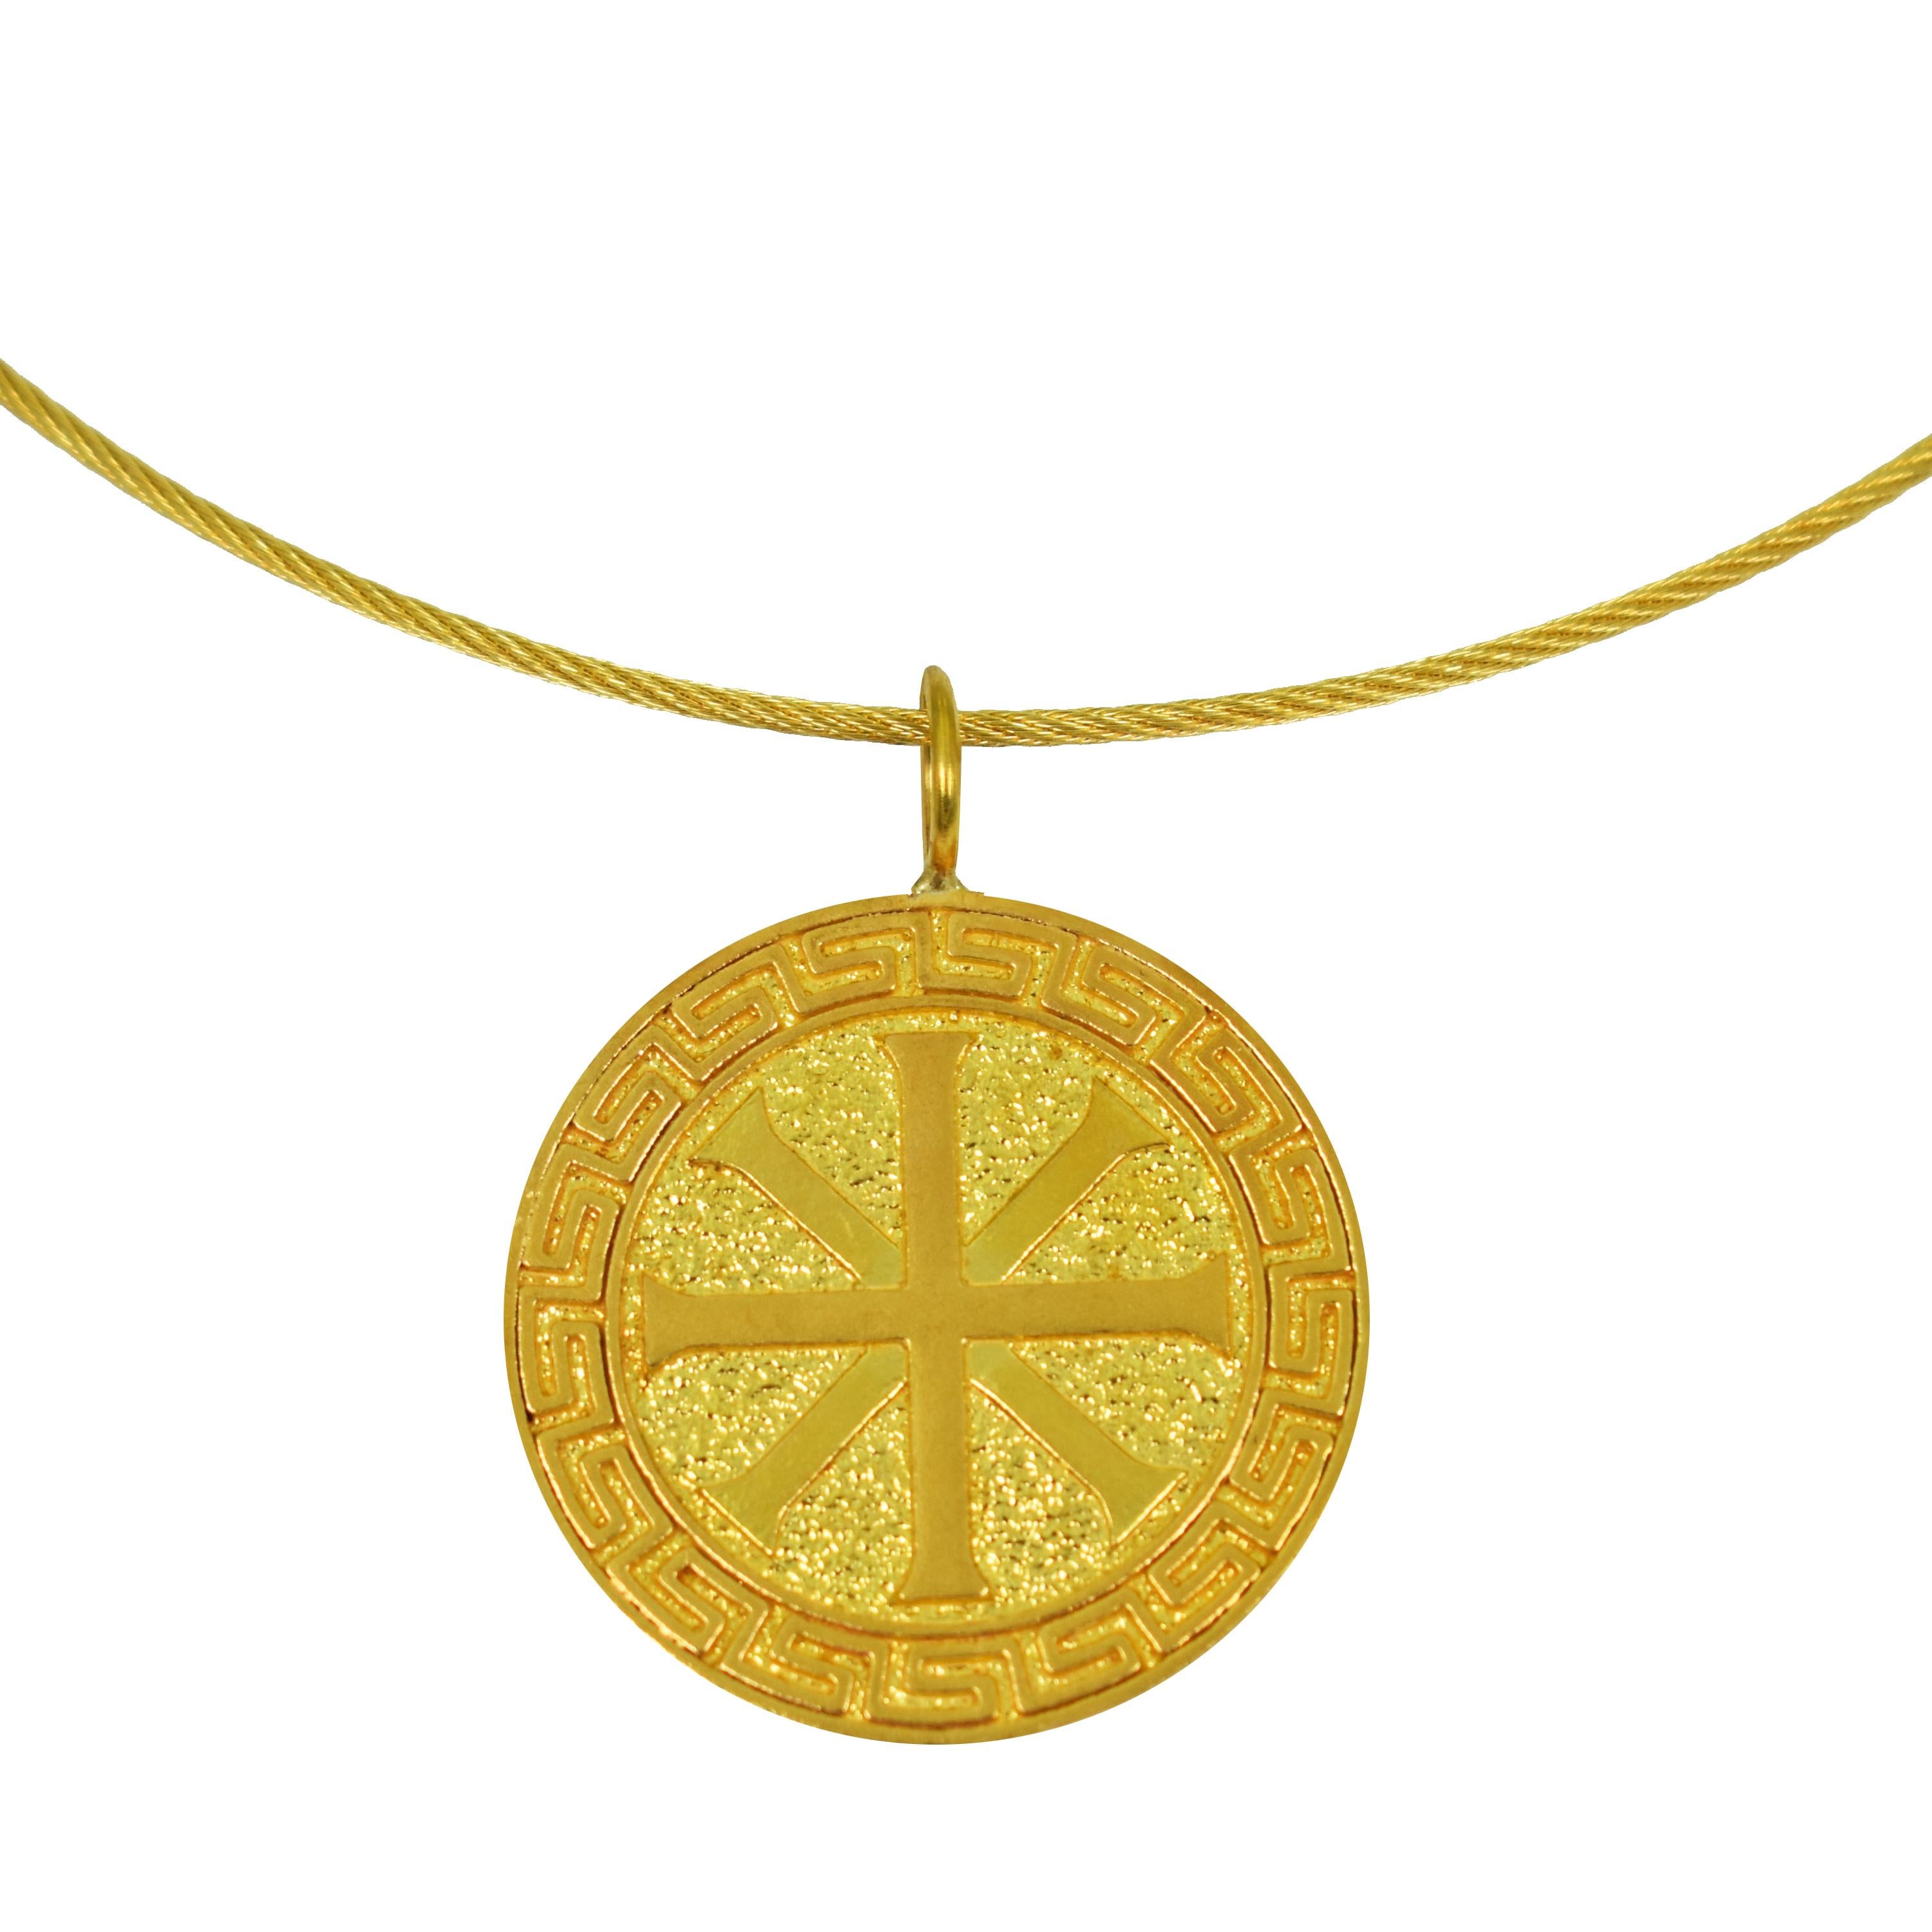 22k yellow gold Ixthus pendant on a 16 inch 18k gold German cord necklace. Pendant is 1.56 inch in length. The ancient Ixthus or Ichthus symbol was used by early Christians, and was created by overlapping the Greek letters ΙΧΘΥΣ, standing for Jesus